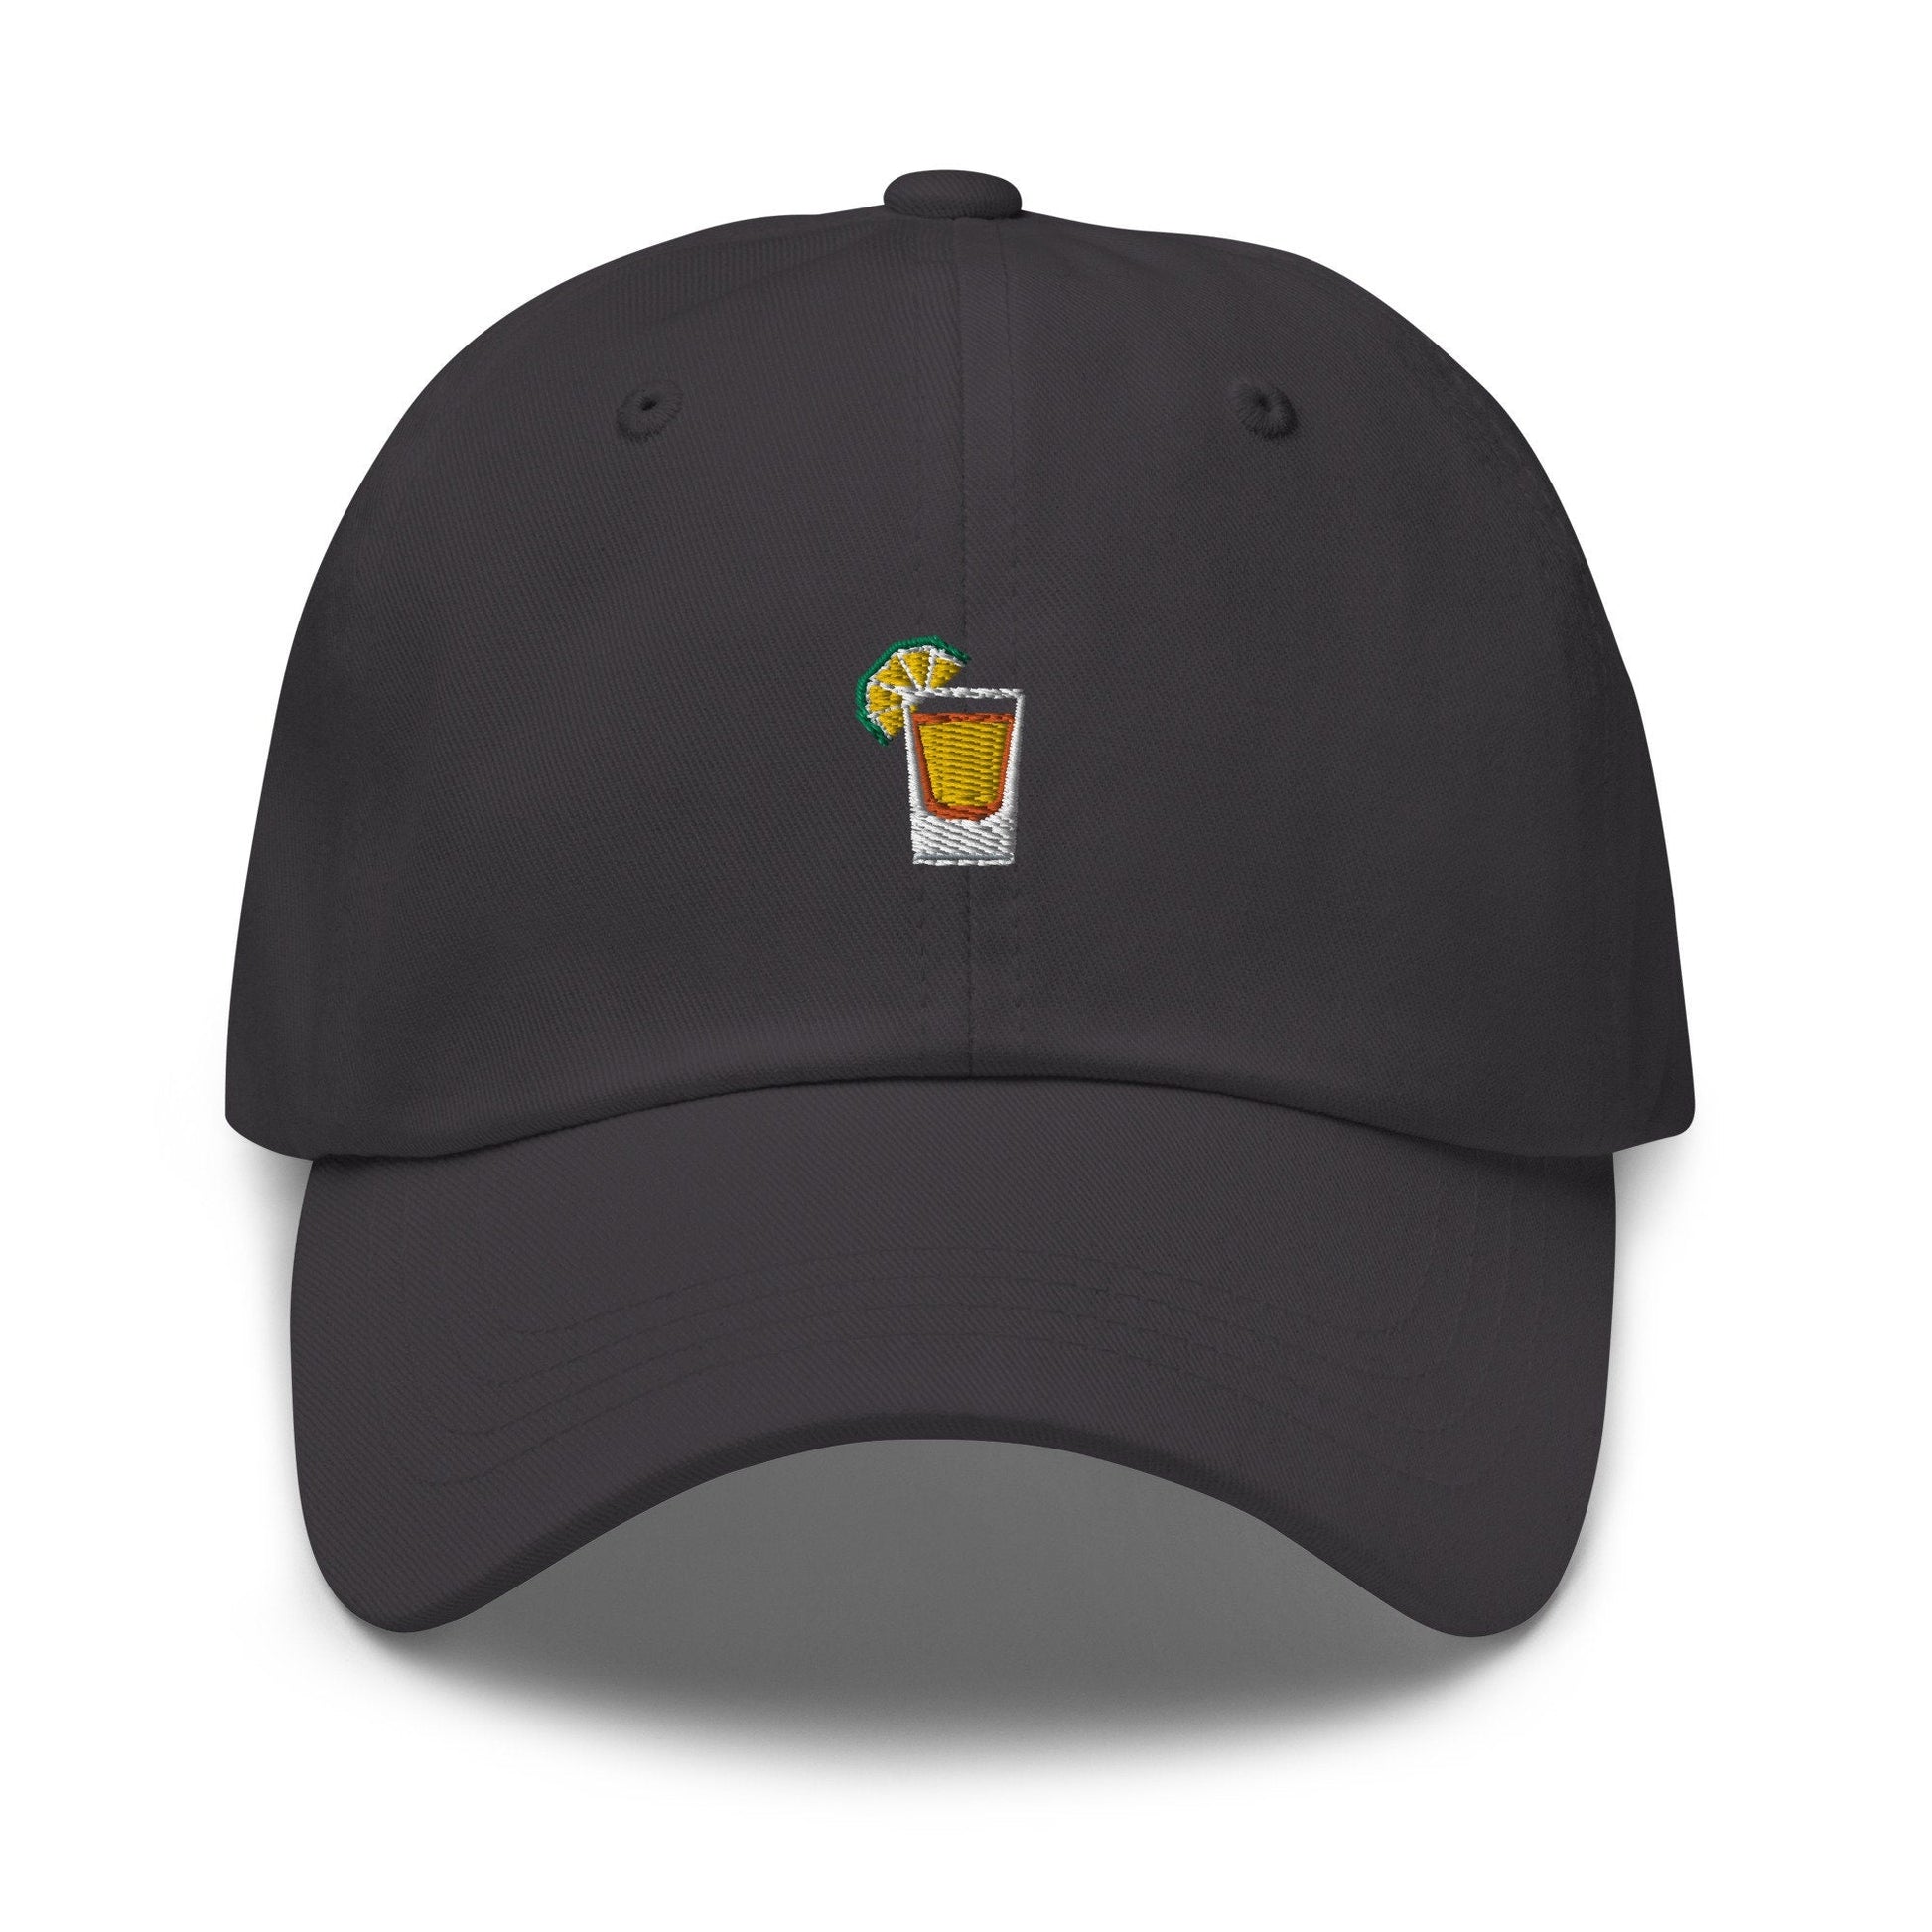 Tequila Shot Dad Hat - Gift for Mexican Spirit Lovers and Party Goers - Multiple Colors - Cotton Embroidered Cap - Evilwater Originals